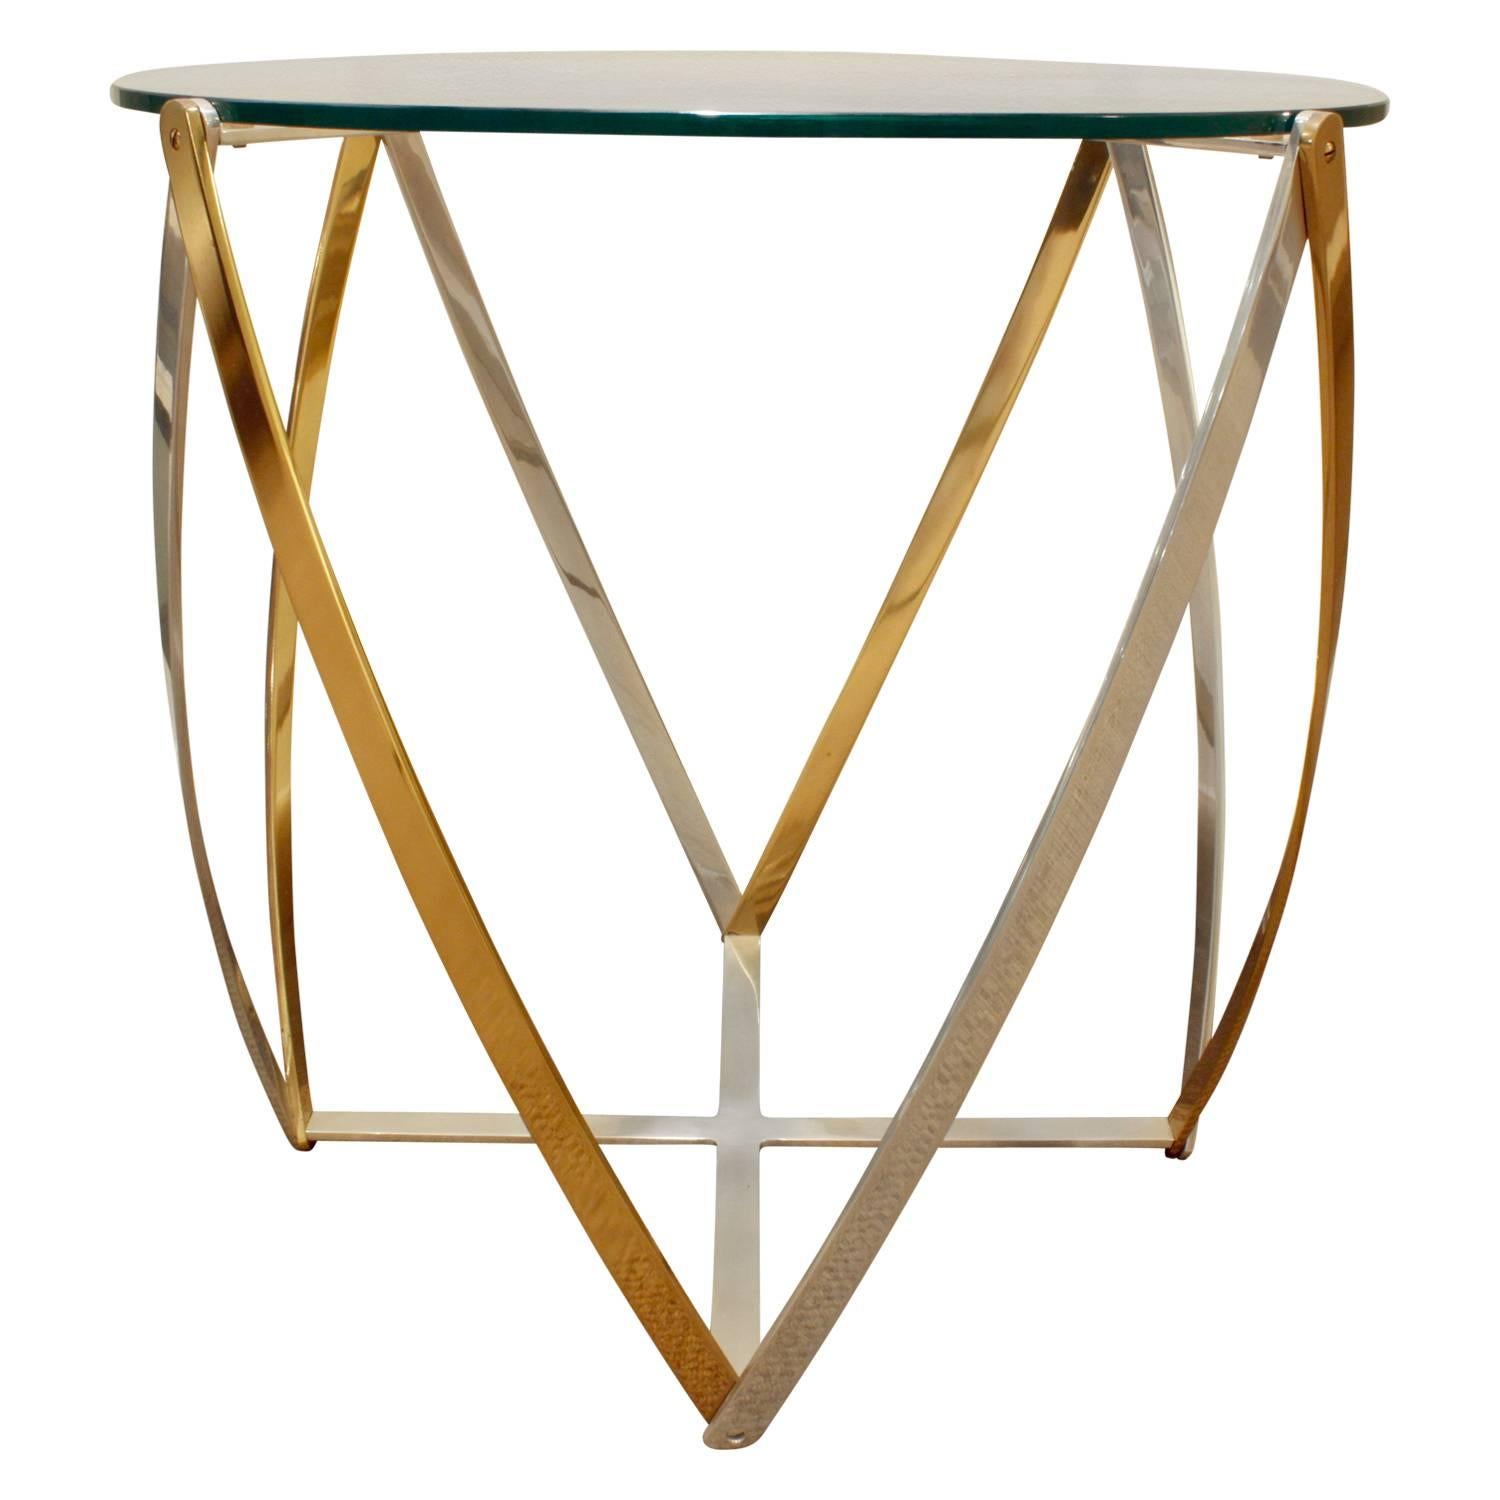 American John Vesey Brass and Brushed Aluminum End Table 1970s For Sale